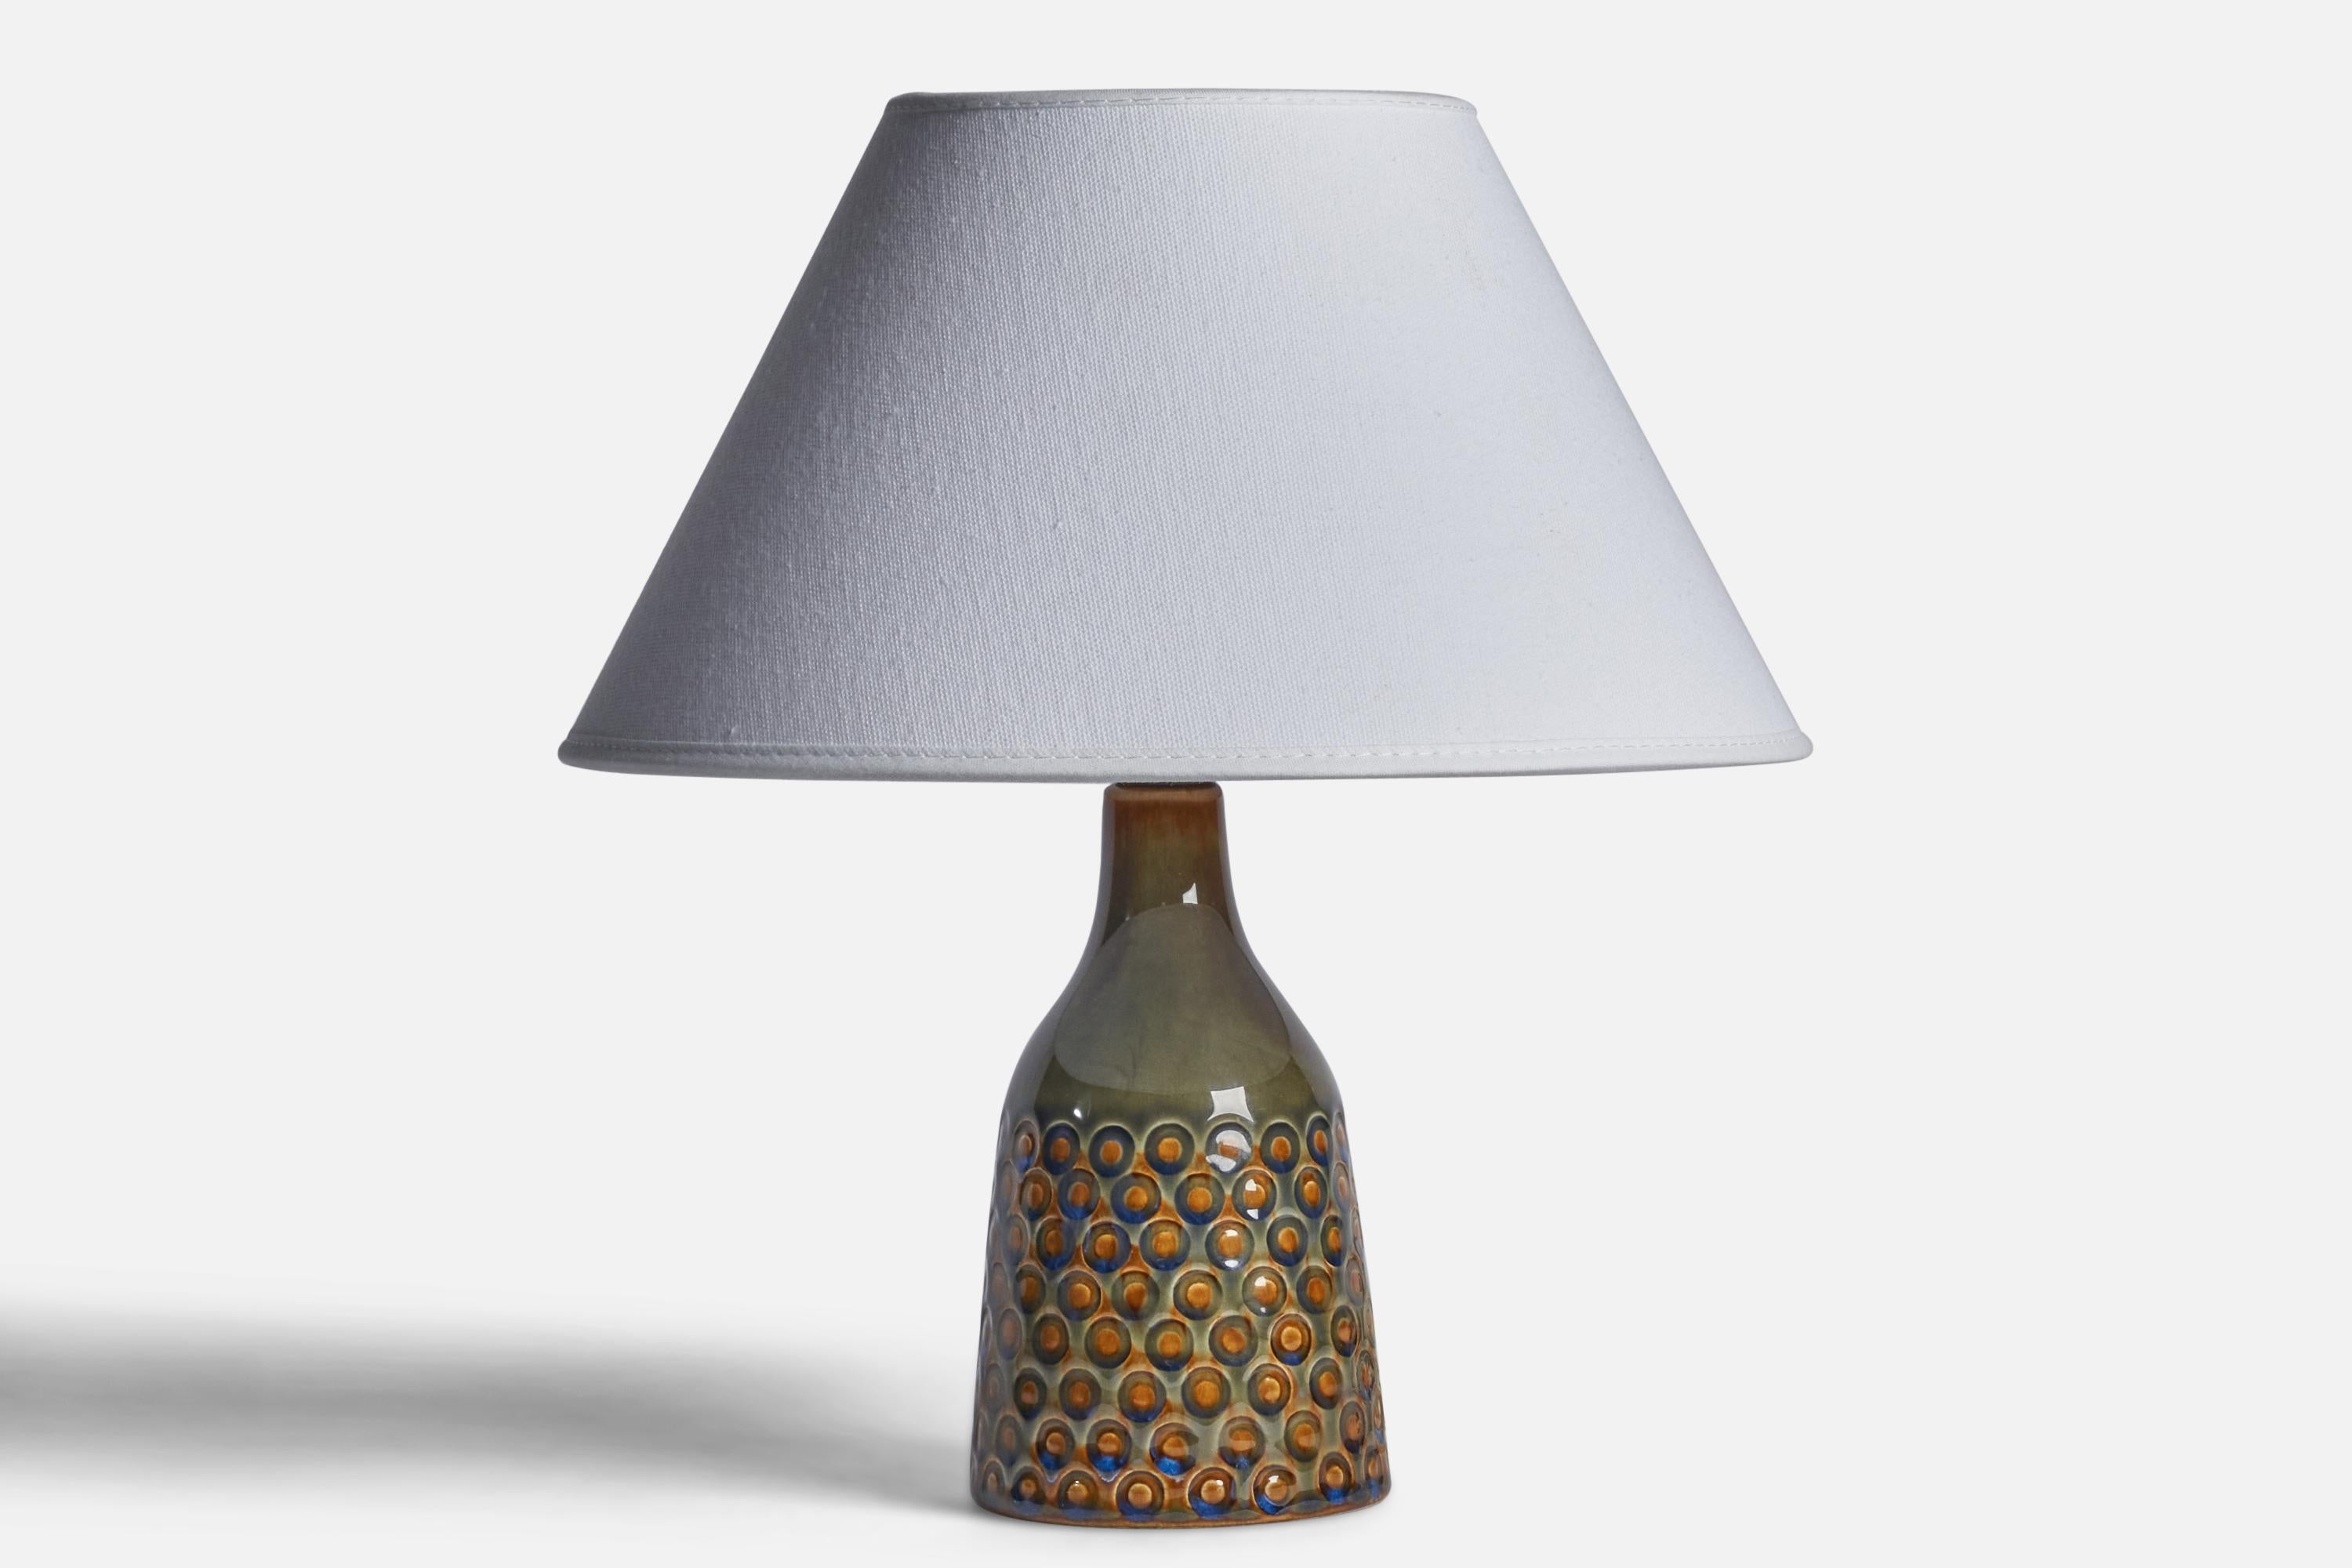 A green, blue and orange-glazed stoneware table lamp designed and produced by Søholm, Bornholm, Denmark, 1960s.

Dimensions of Lamp (inches): 8.25” H x 3.35” Diameter
Dimensions of Shade (inches): 7” Top Diameter x 10” Bottom Diameter x